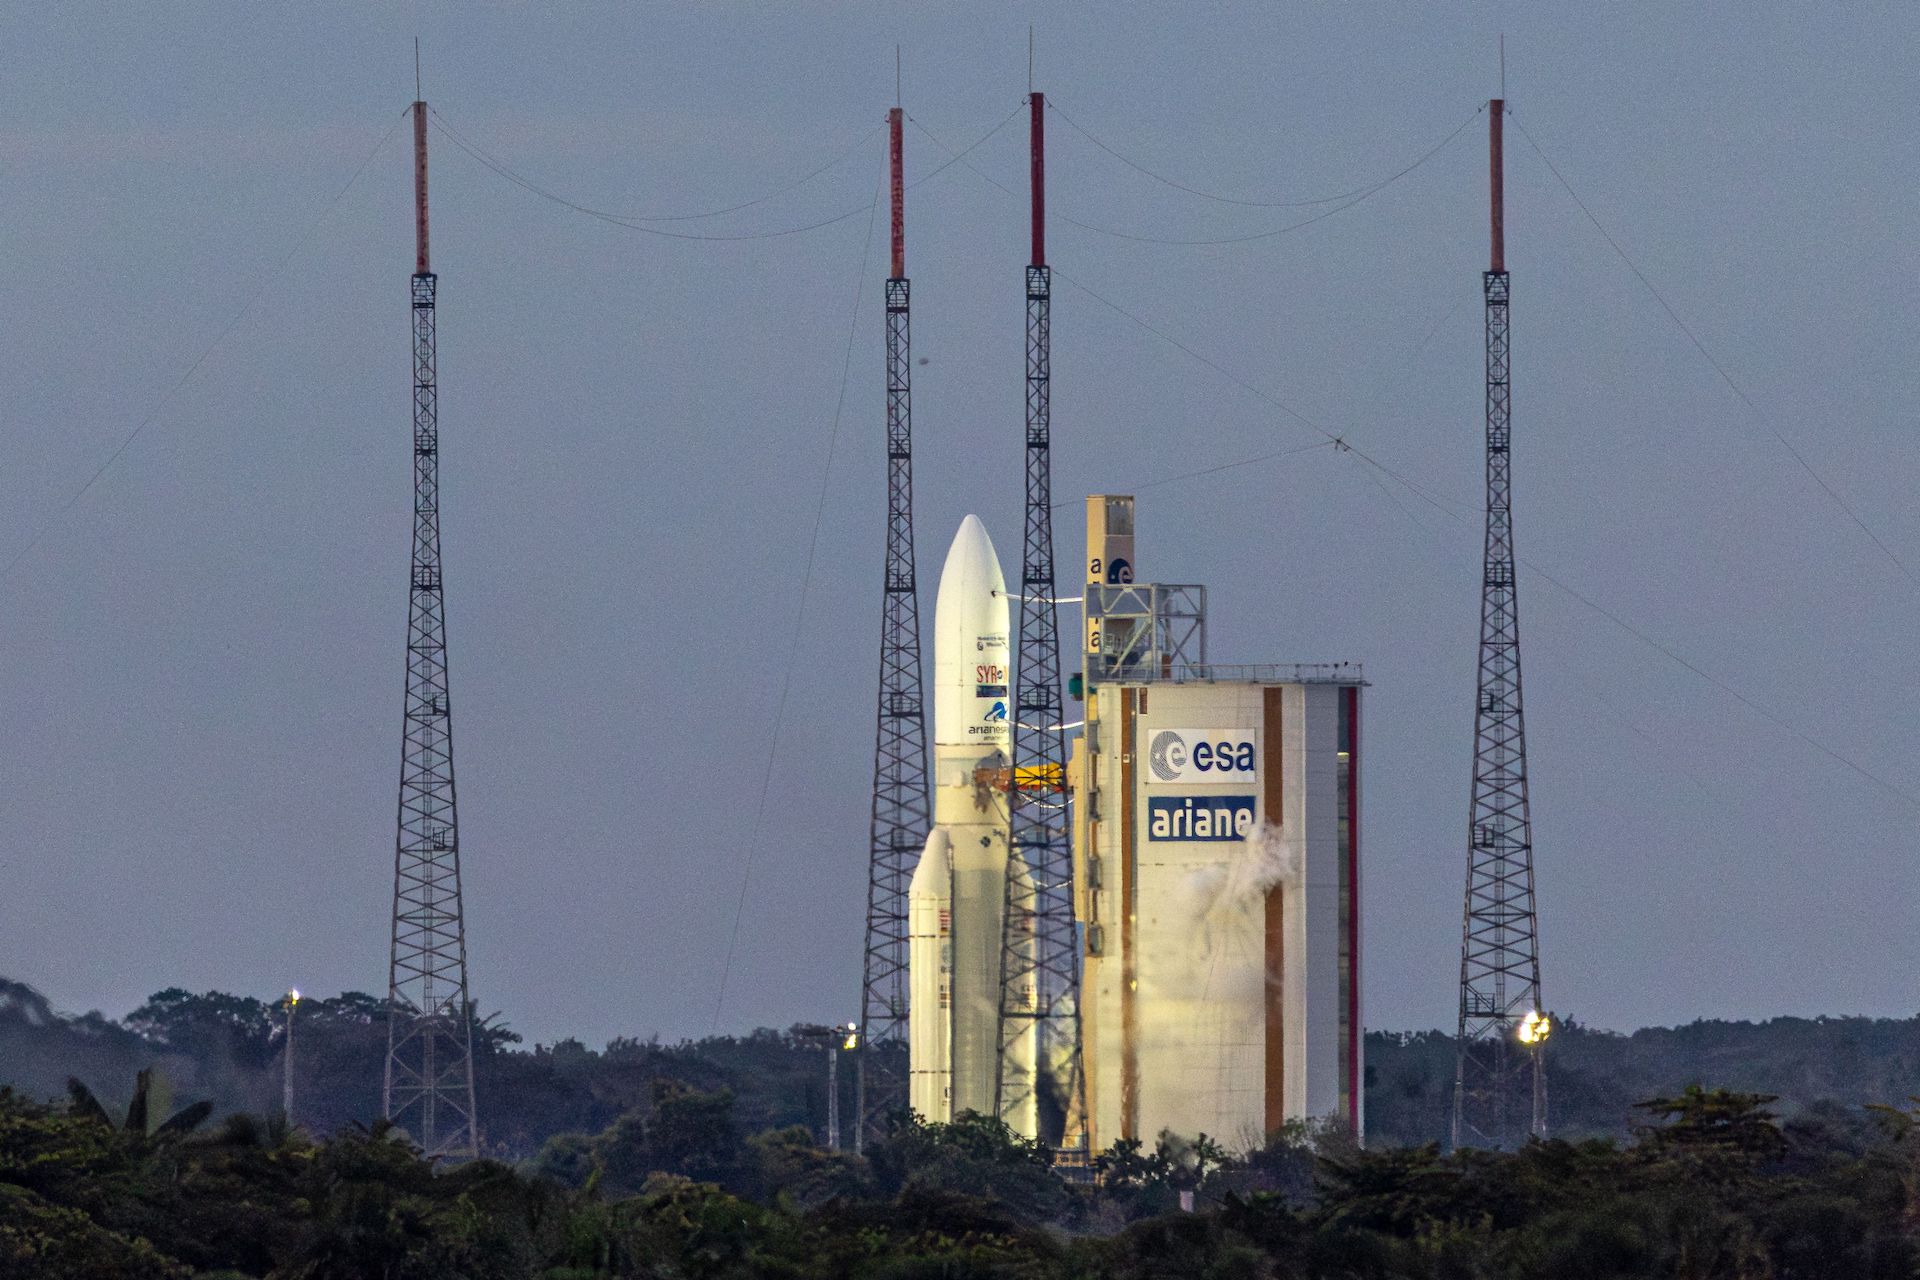 Breaking News A gloomy grey sky sits in the aid of the spotlit Ariane 5 standing on the luanchpad at Europe's Spaceport in French Guiana.